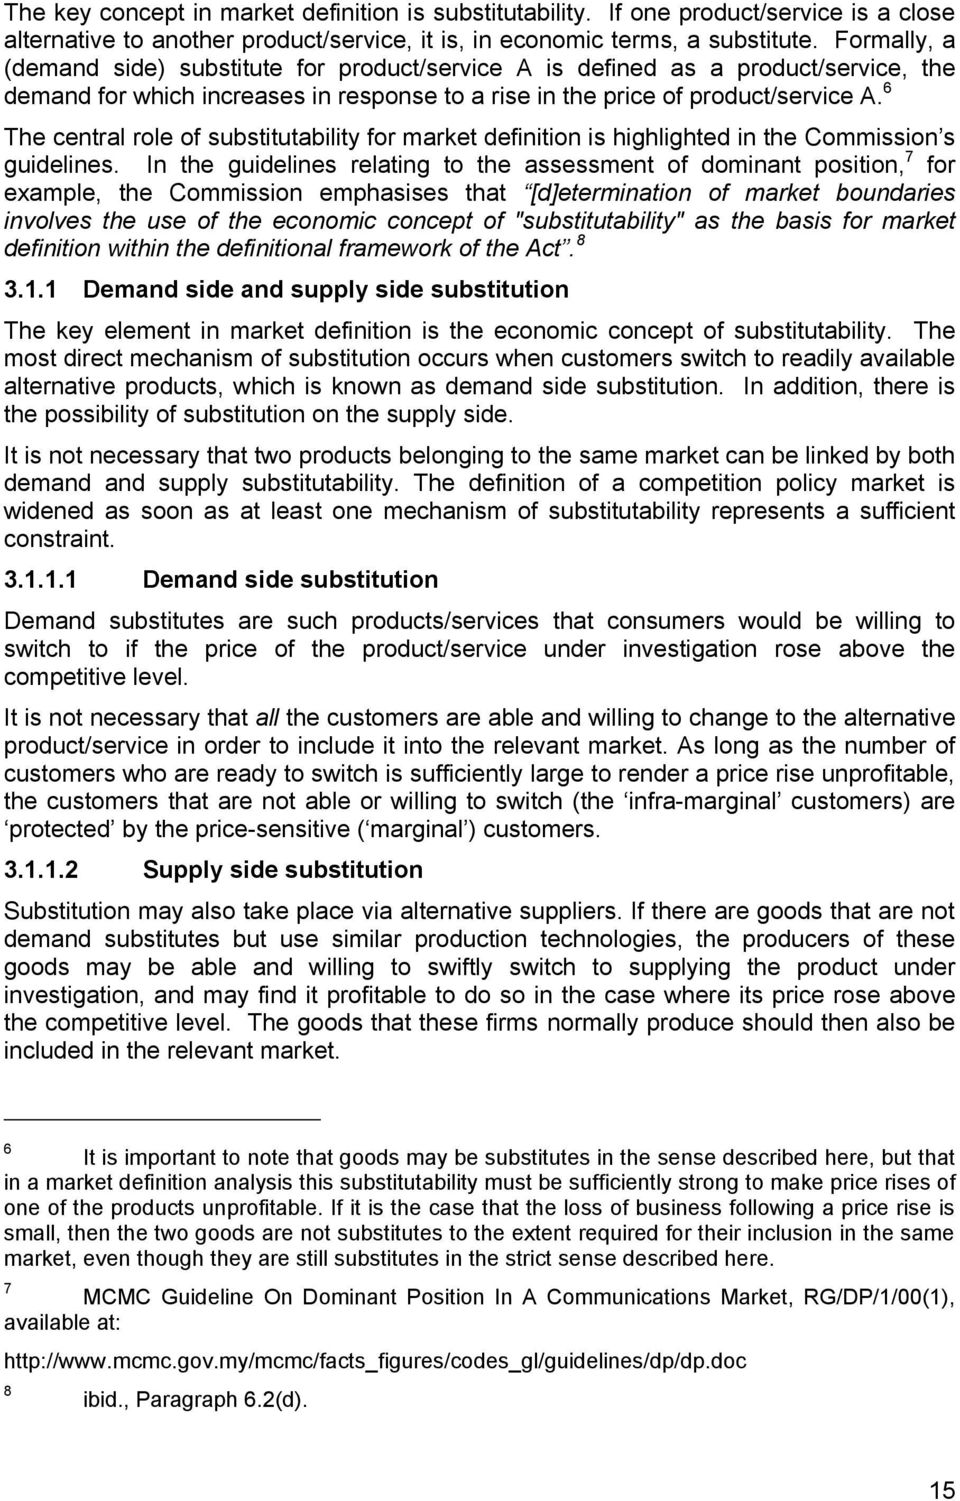 6 The central role of substitutability for market definition is highlighted in the Commission s guidelines.